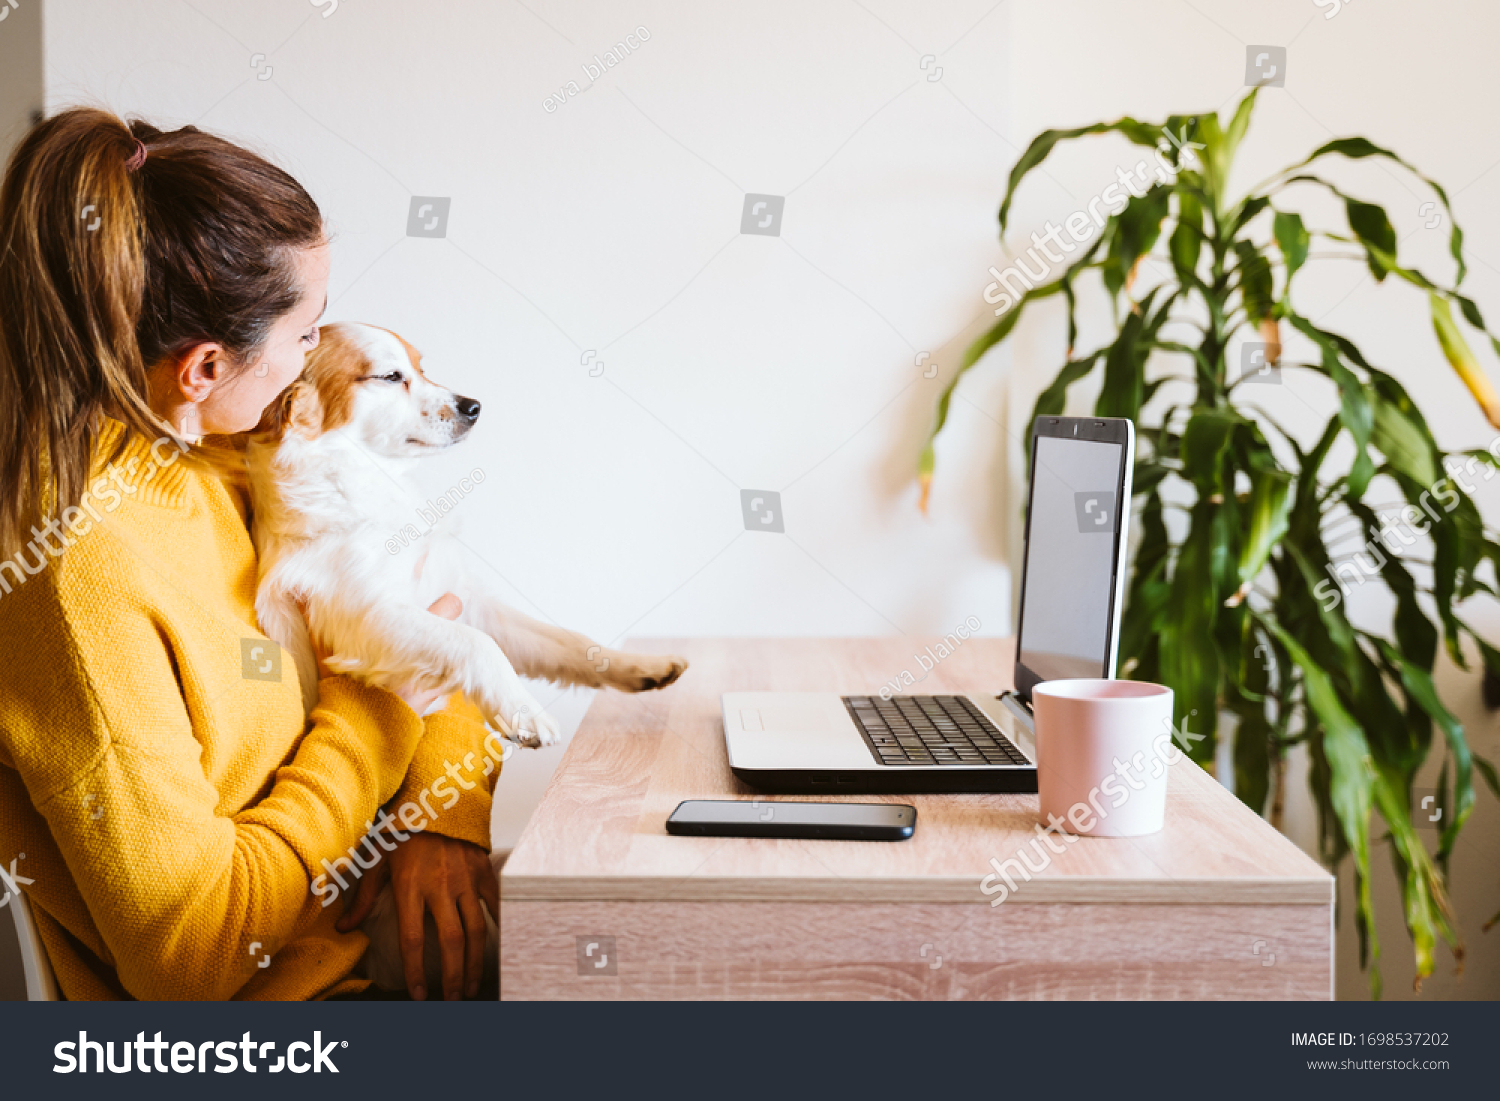 young woman working on laptop at home, wearing protective mask, cute small dog besides. work from home, stay safe during coronavirus covid-2019 concpt #1698537202